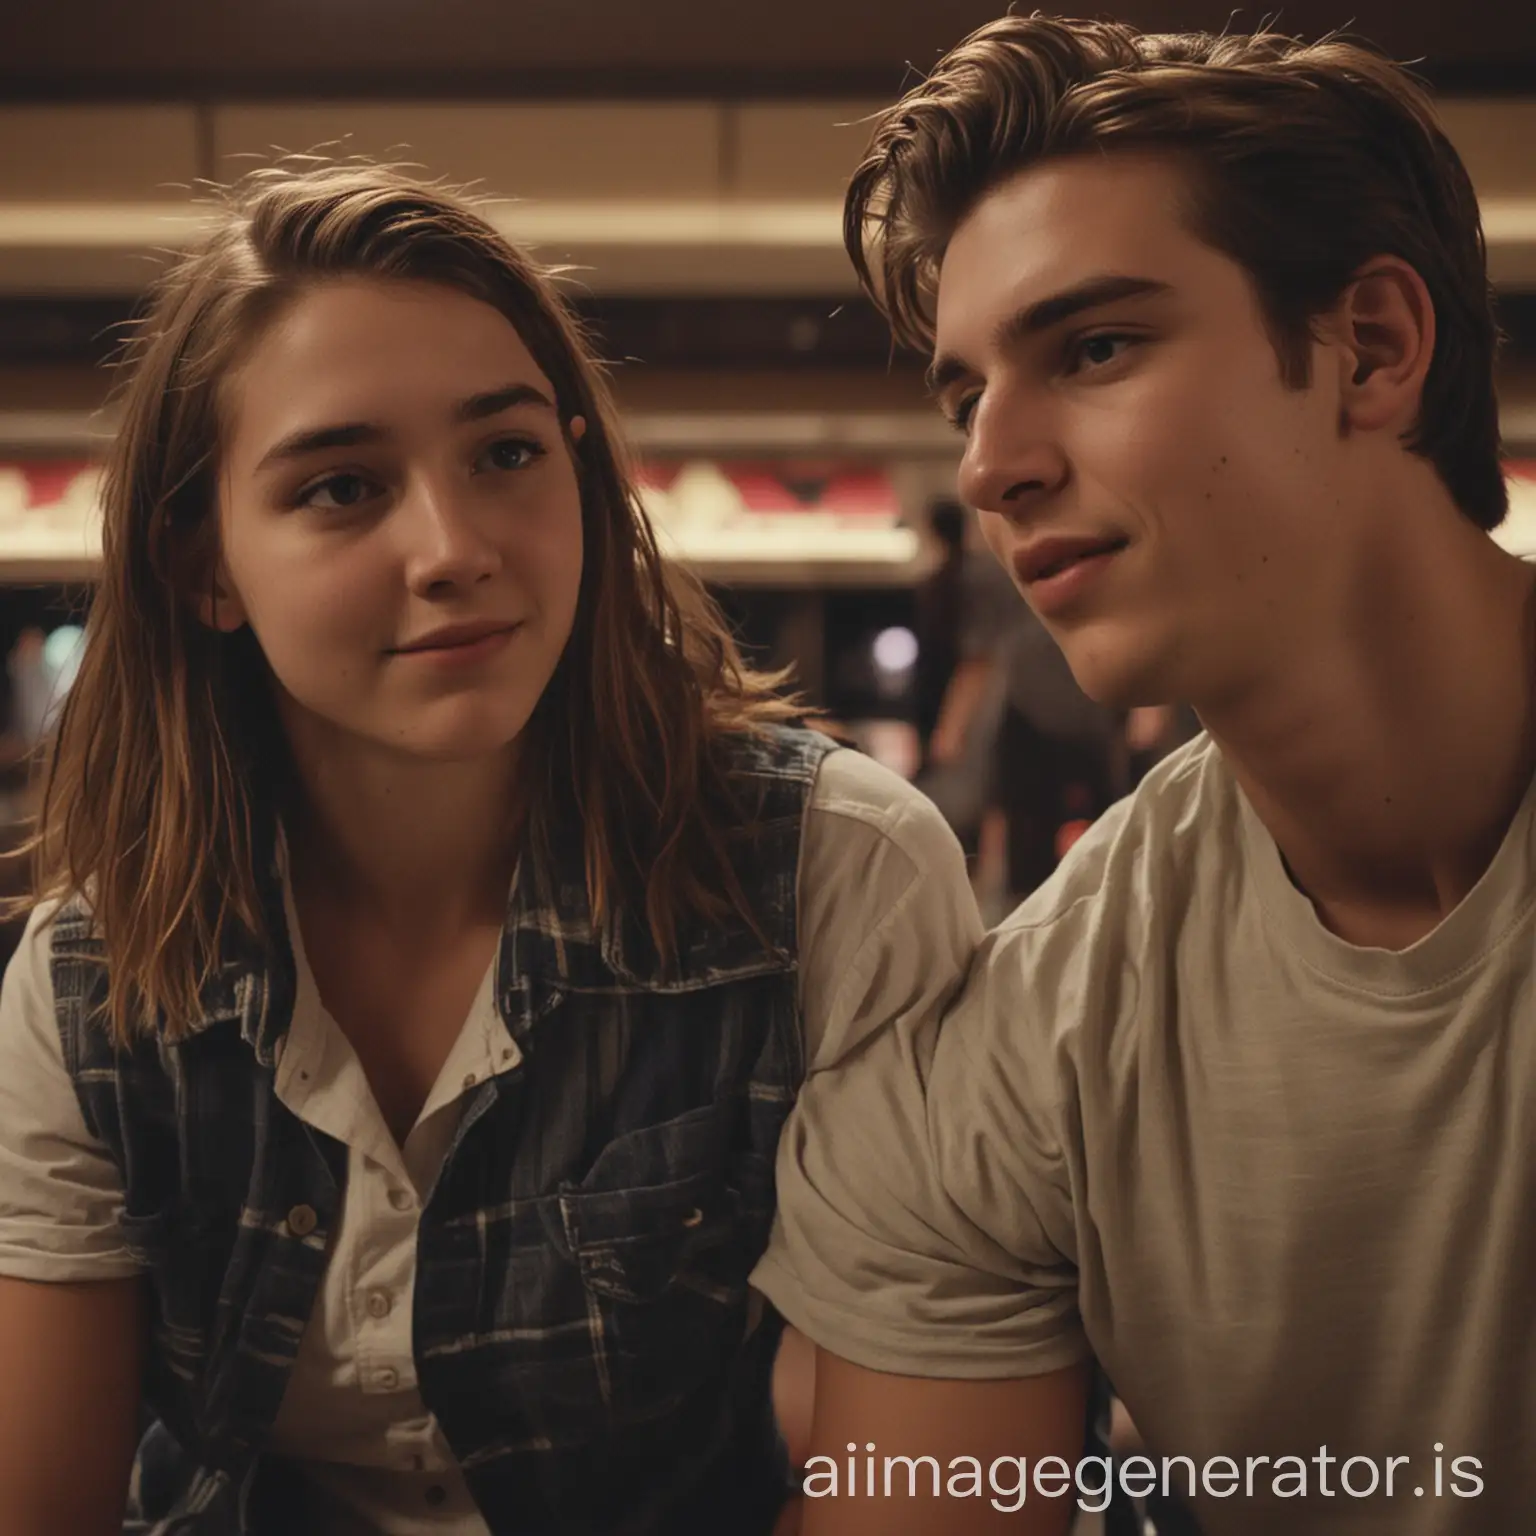 20 year old boy and 20 year old girl bowling, they are boyfriend and girlfriend. Low lighting. Like a film not looking at the camera. Close to their faces, they look at each other